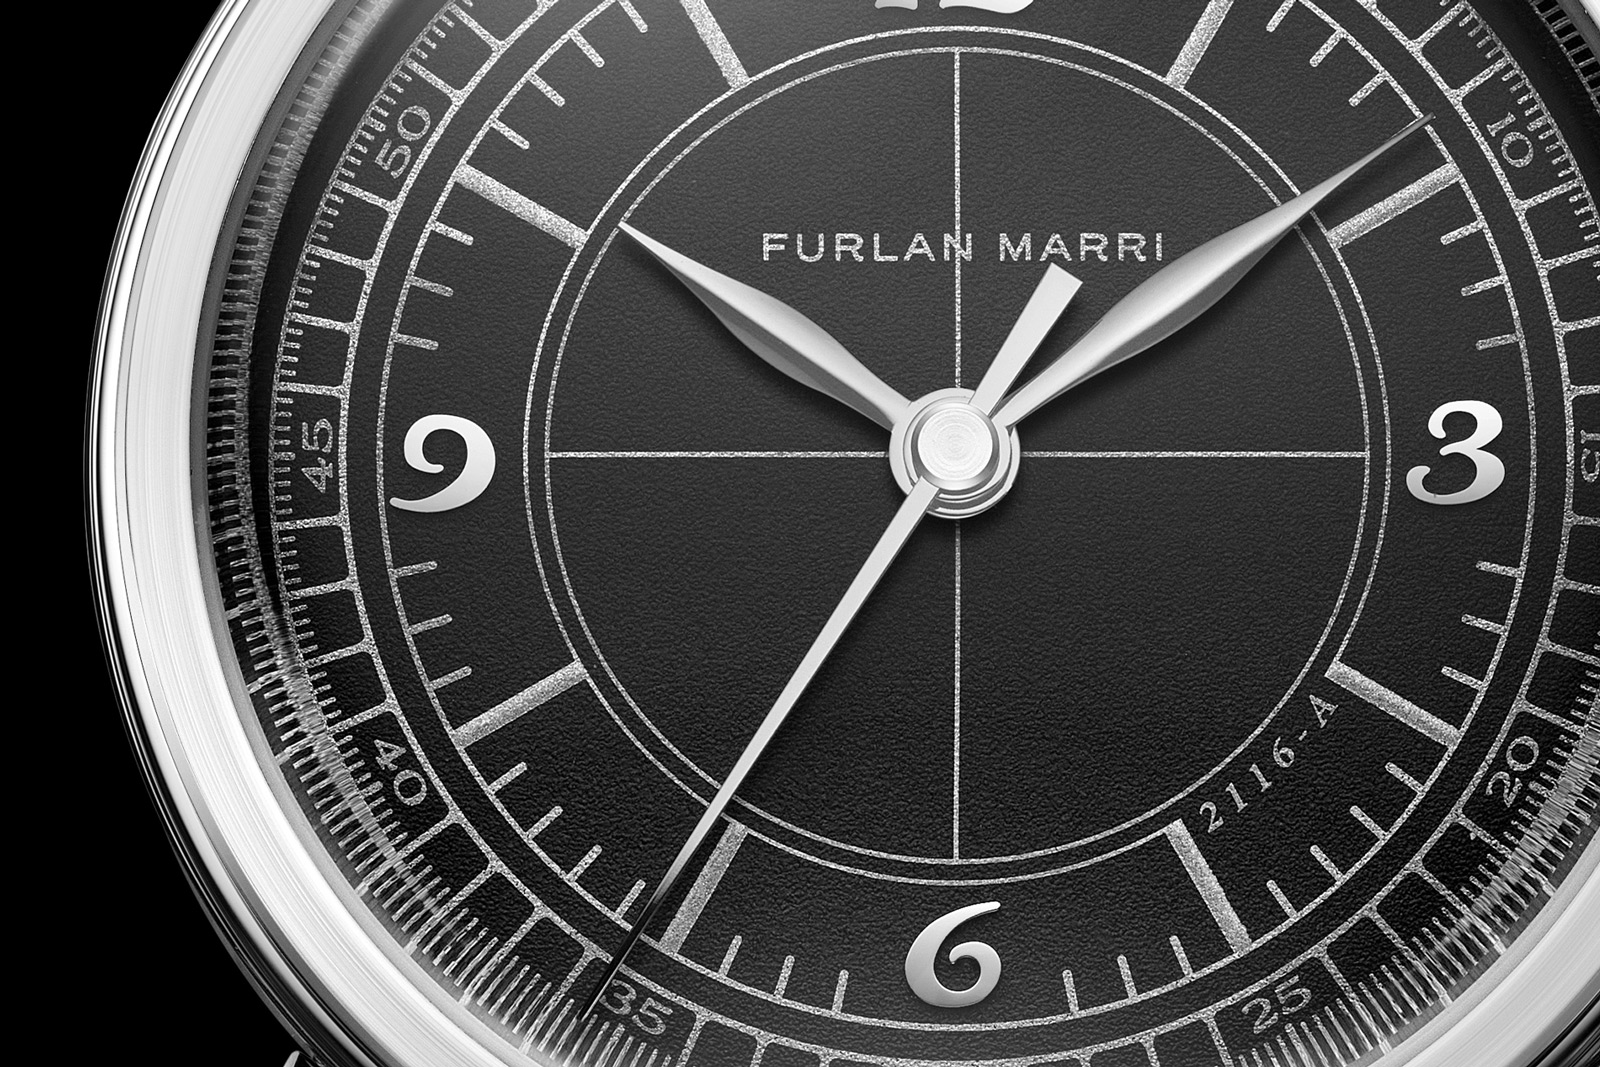 Cult-Followed Furlan Marri Just Dropped Its First-Ever Affordable Automatic Watch